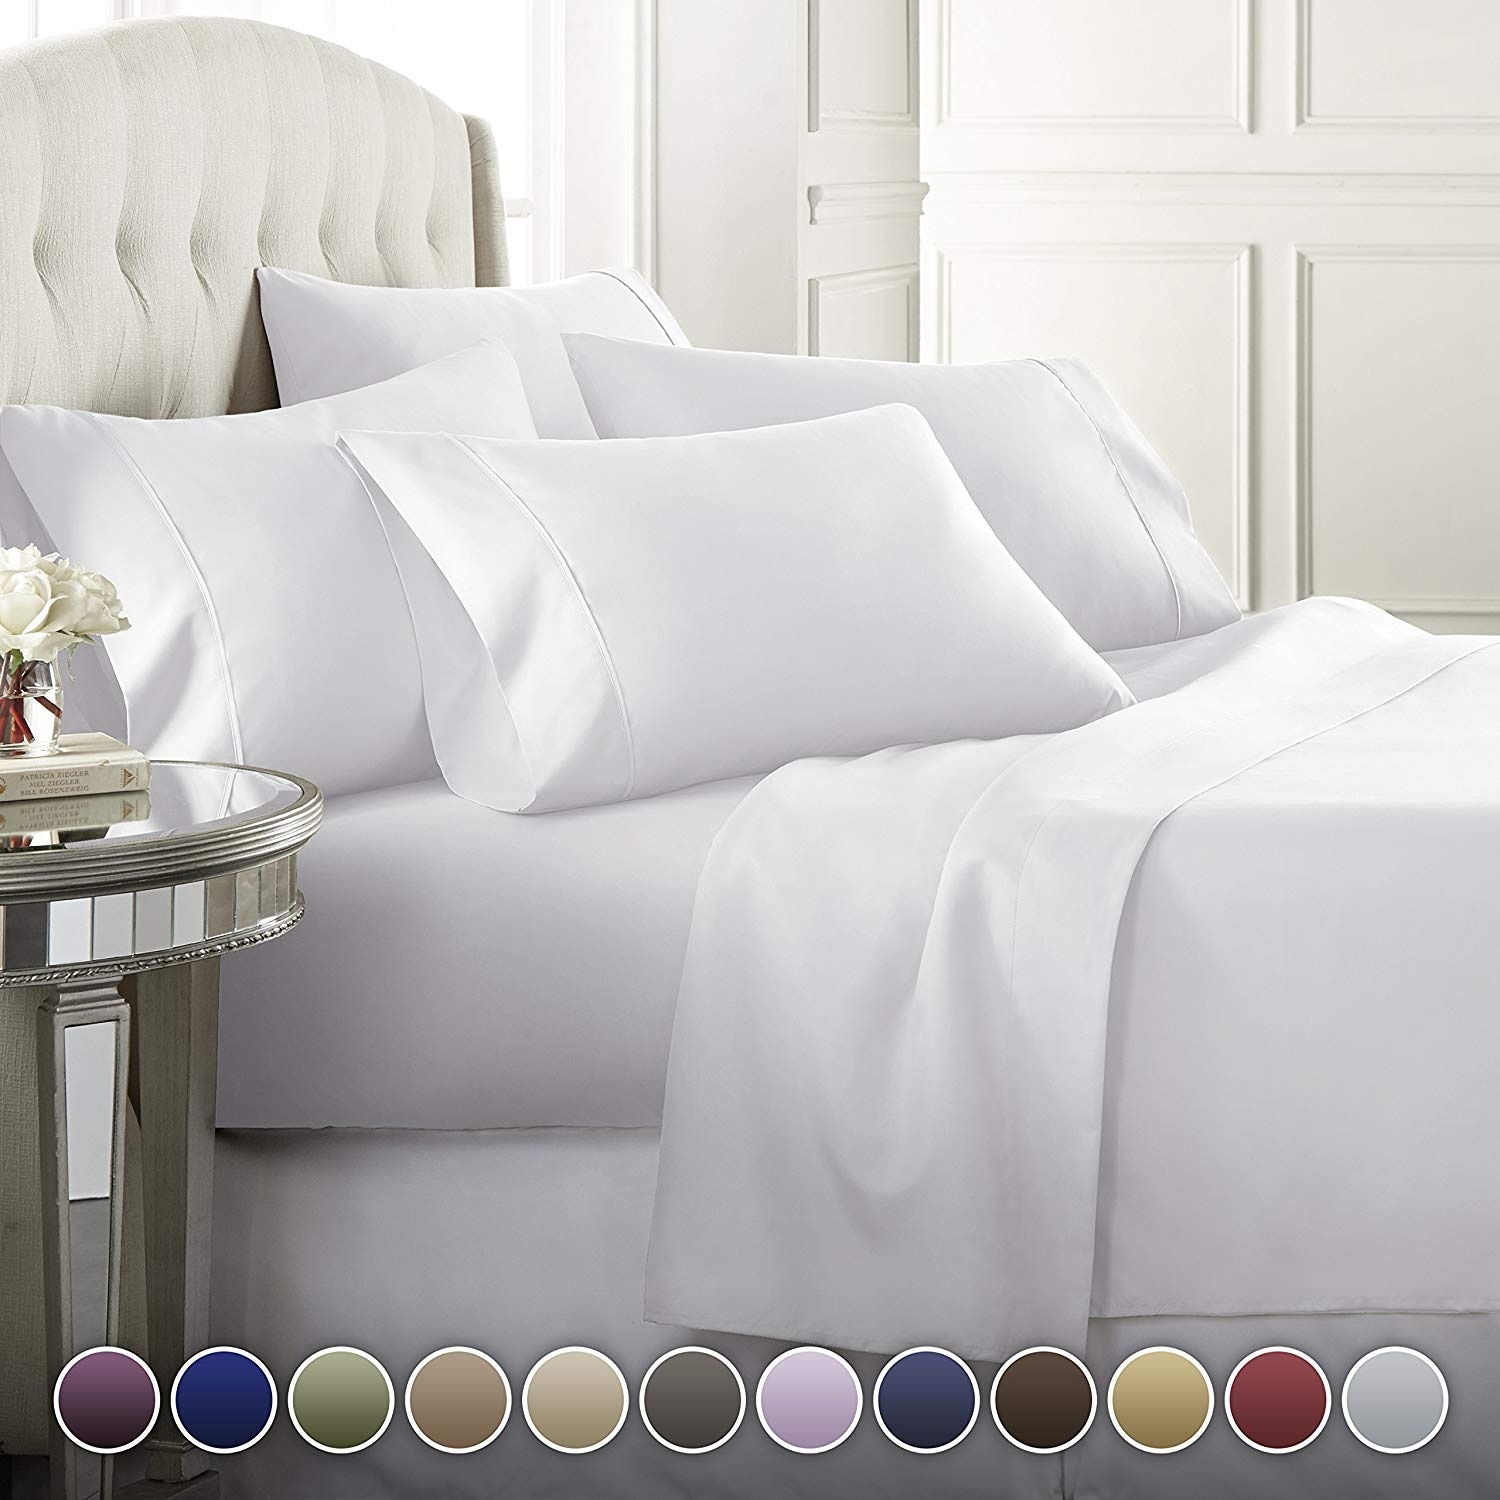 Queen 6 Piece Sheet Set - Breathable & Cooling Bed Sheets - Hotel Luxury  Bed Sheets for Women